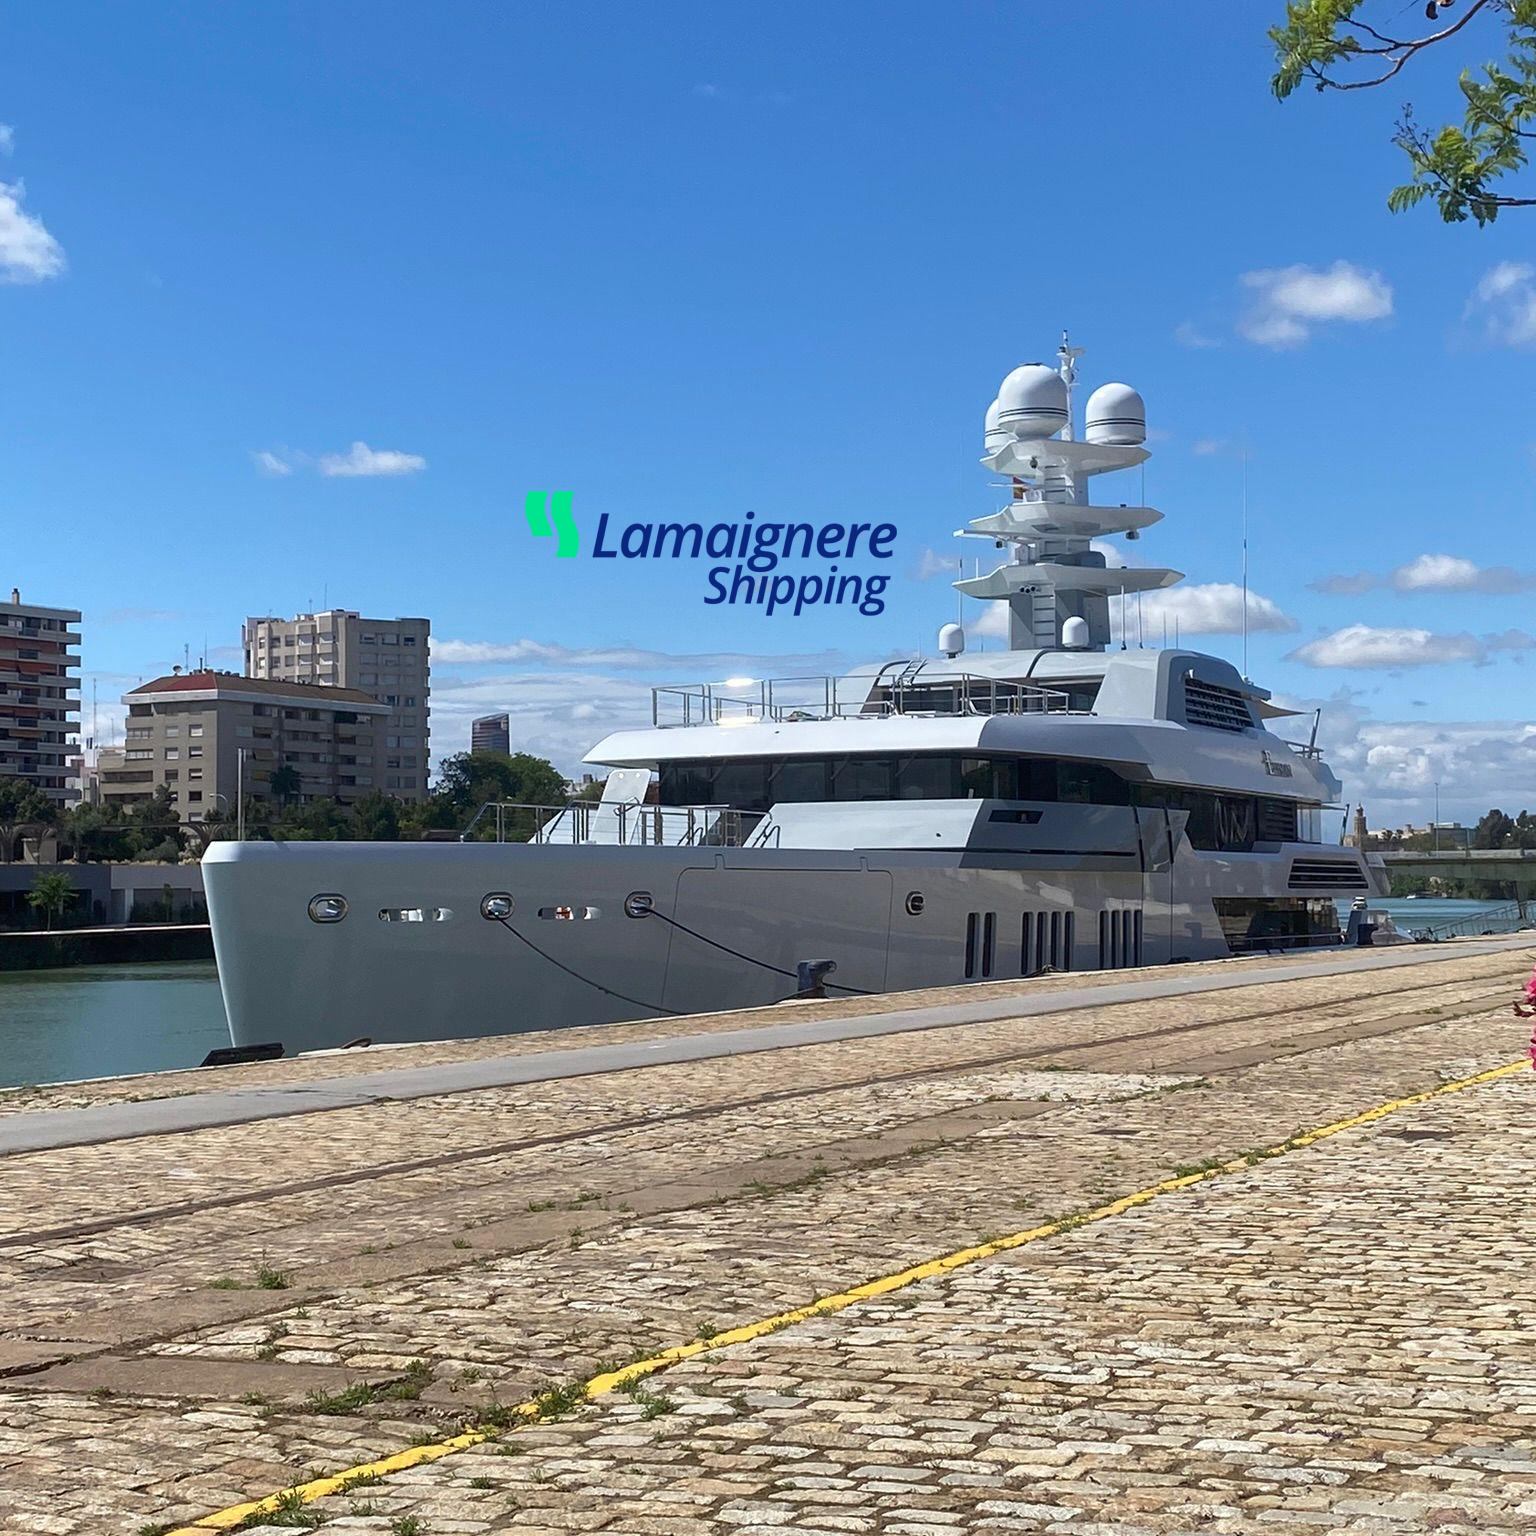 Lamaignere Shipping provides assistance to the Elysian Yacht in Cadiz and Seville